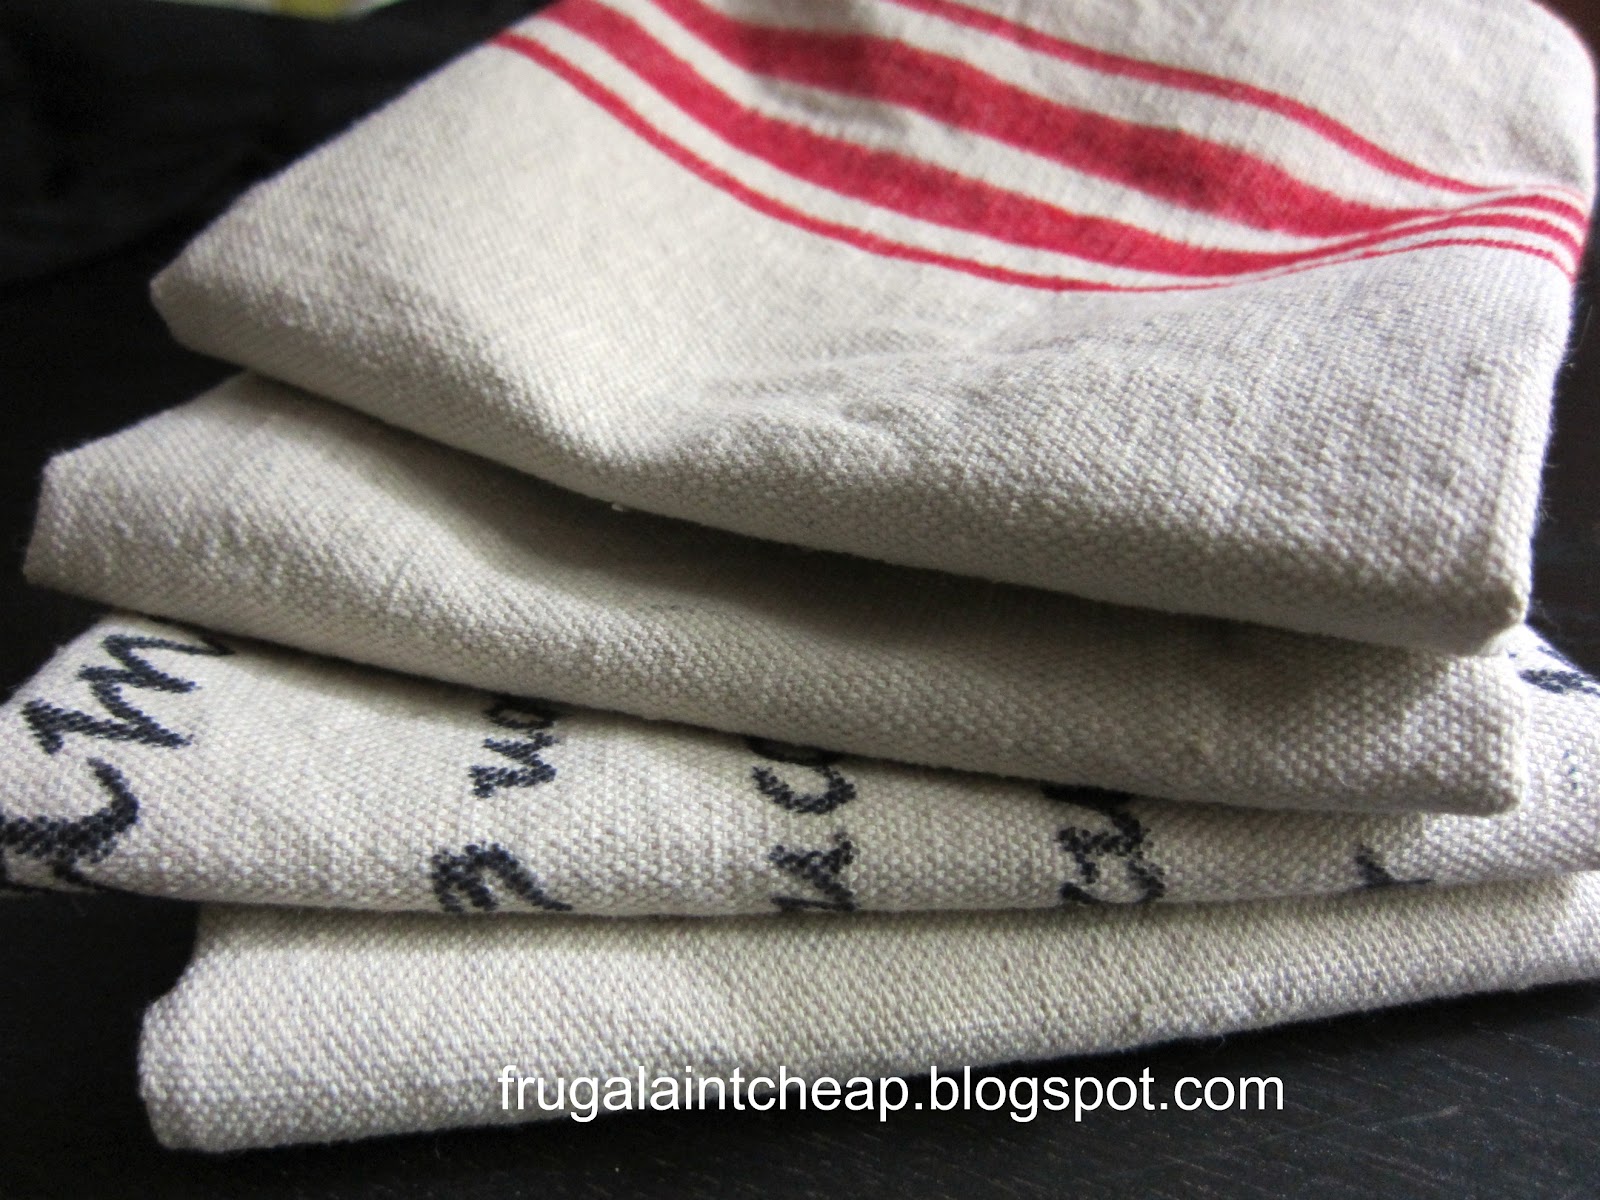 Frugal Ain't Cheap: Set of Kitchen Towels